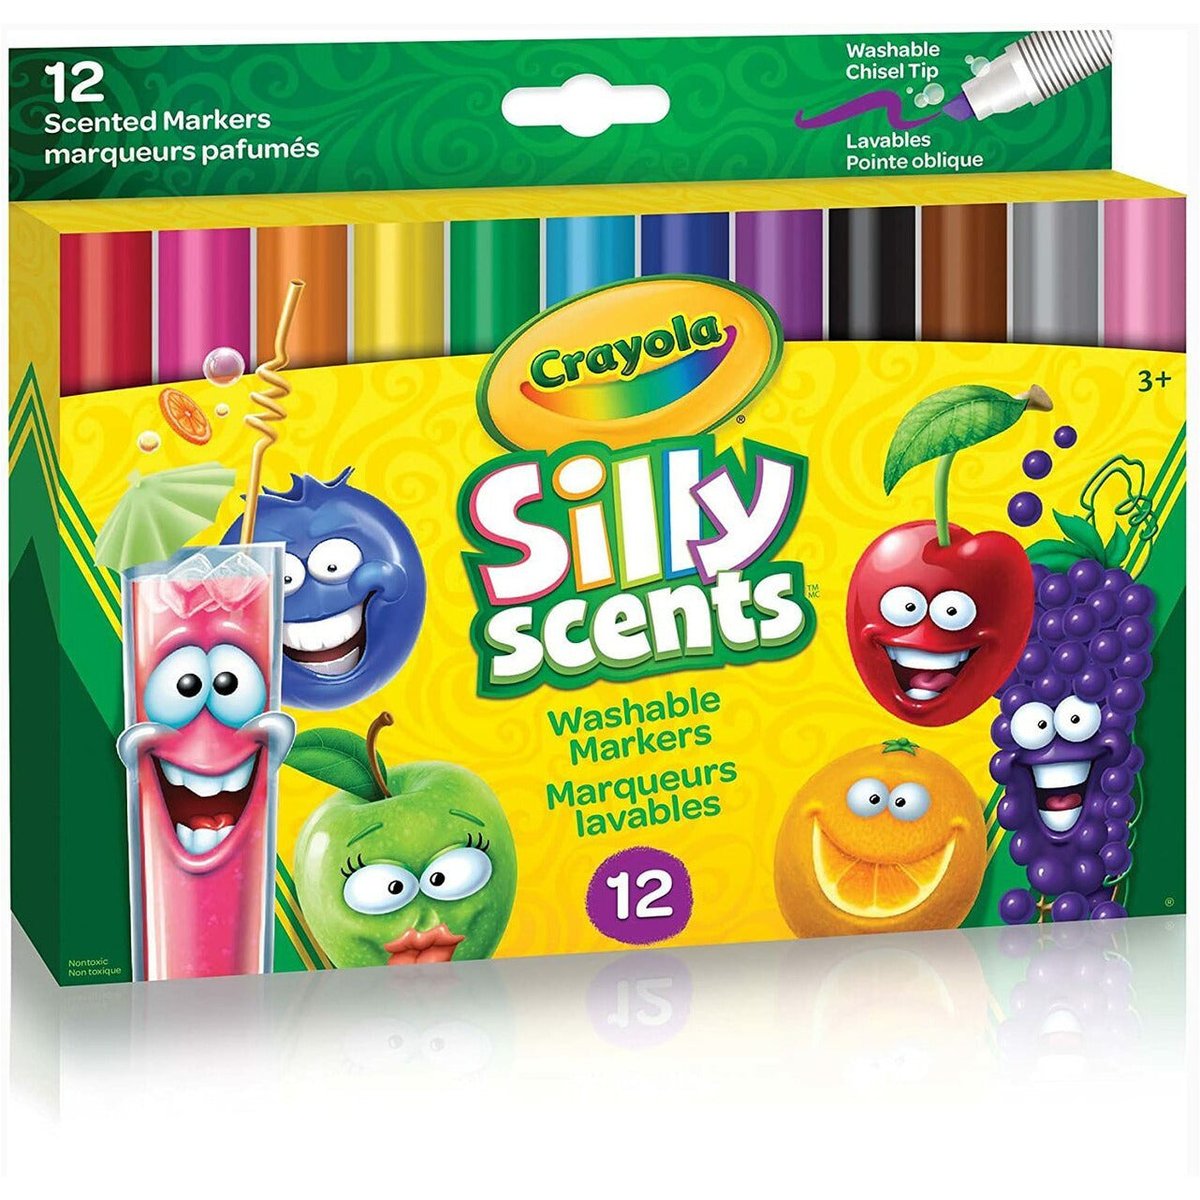 Crayola Silly Scents Sweet & Stinky Scented Washable Markers, 20 Count -  Couponing with Rachel